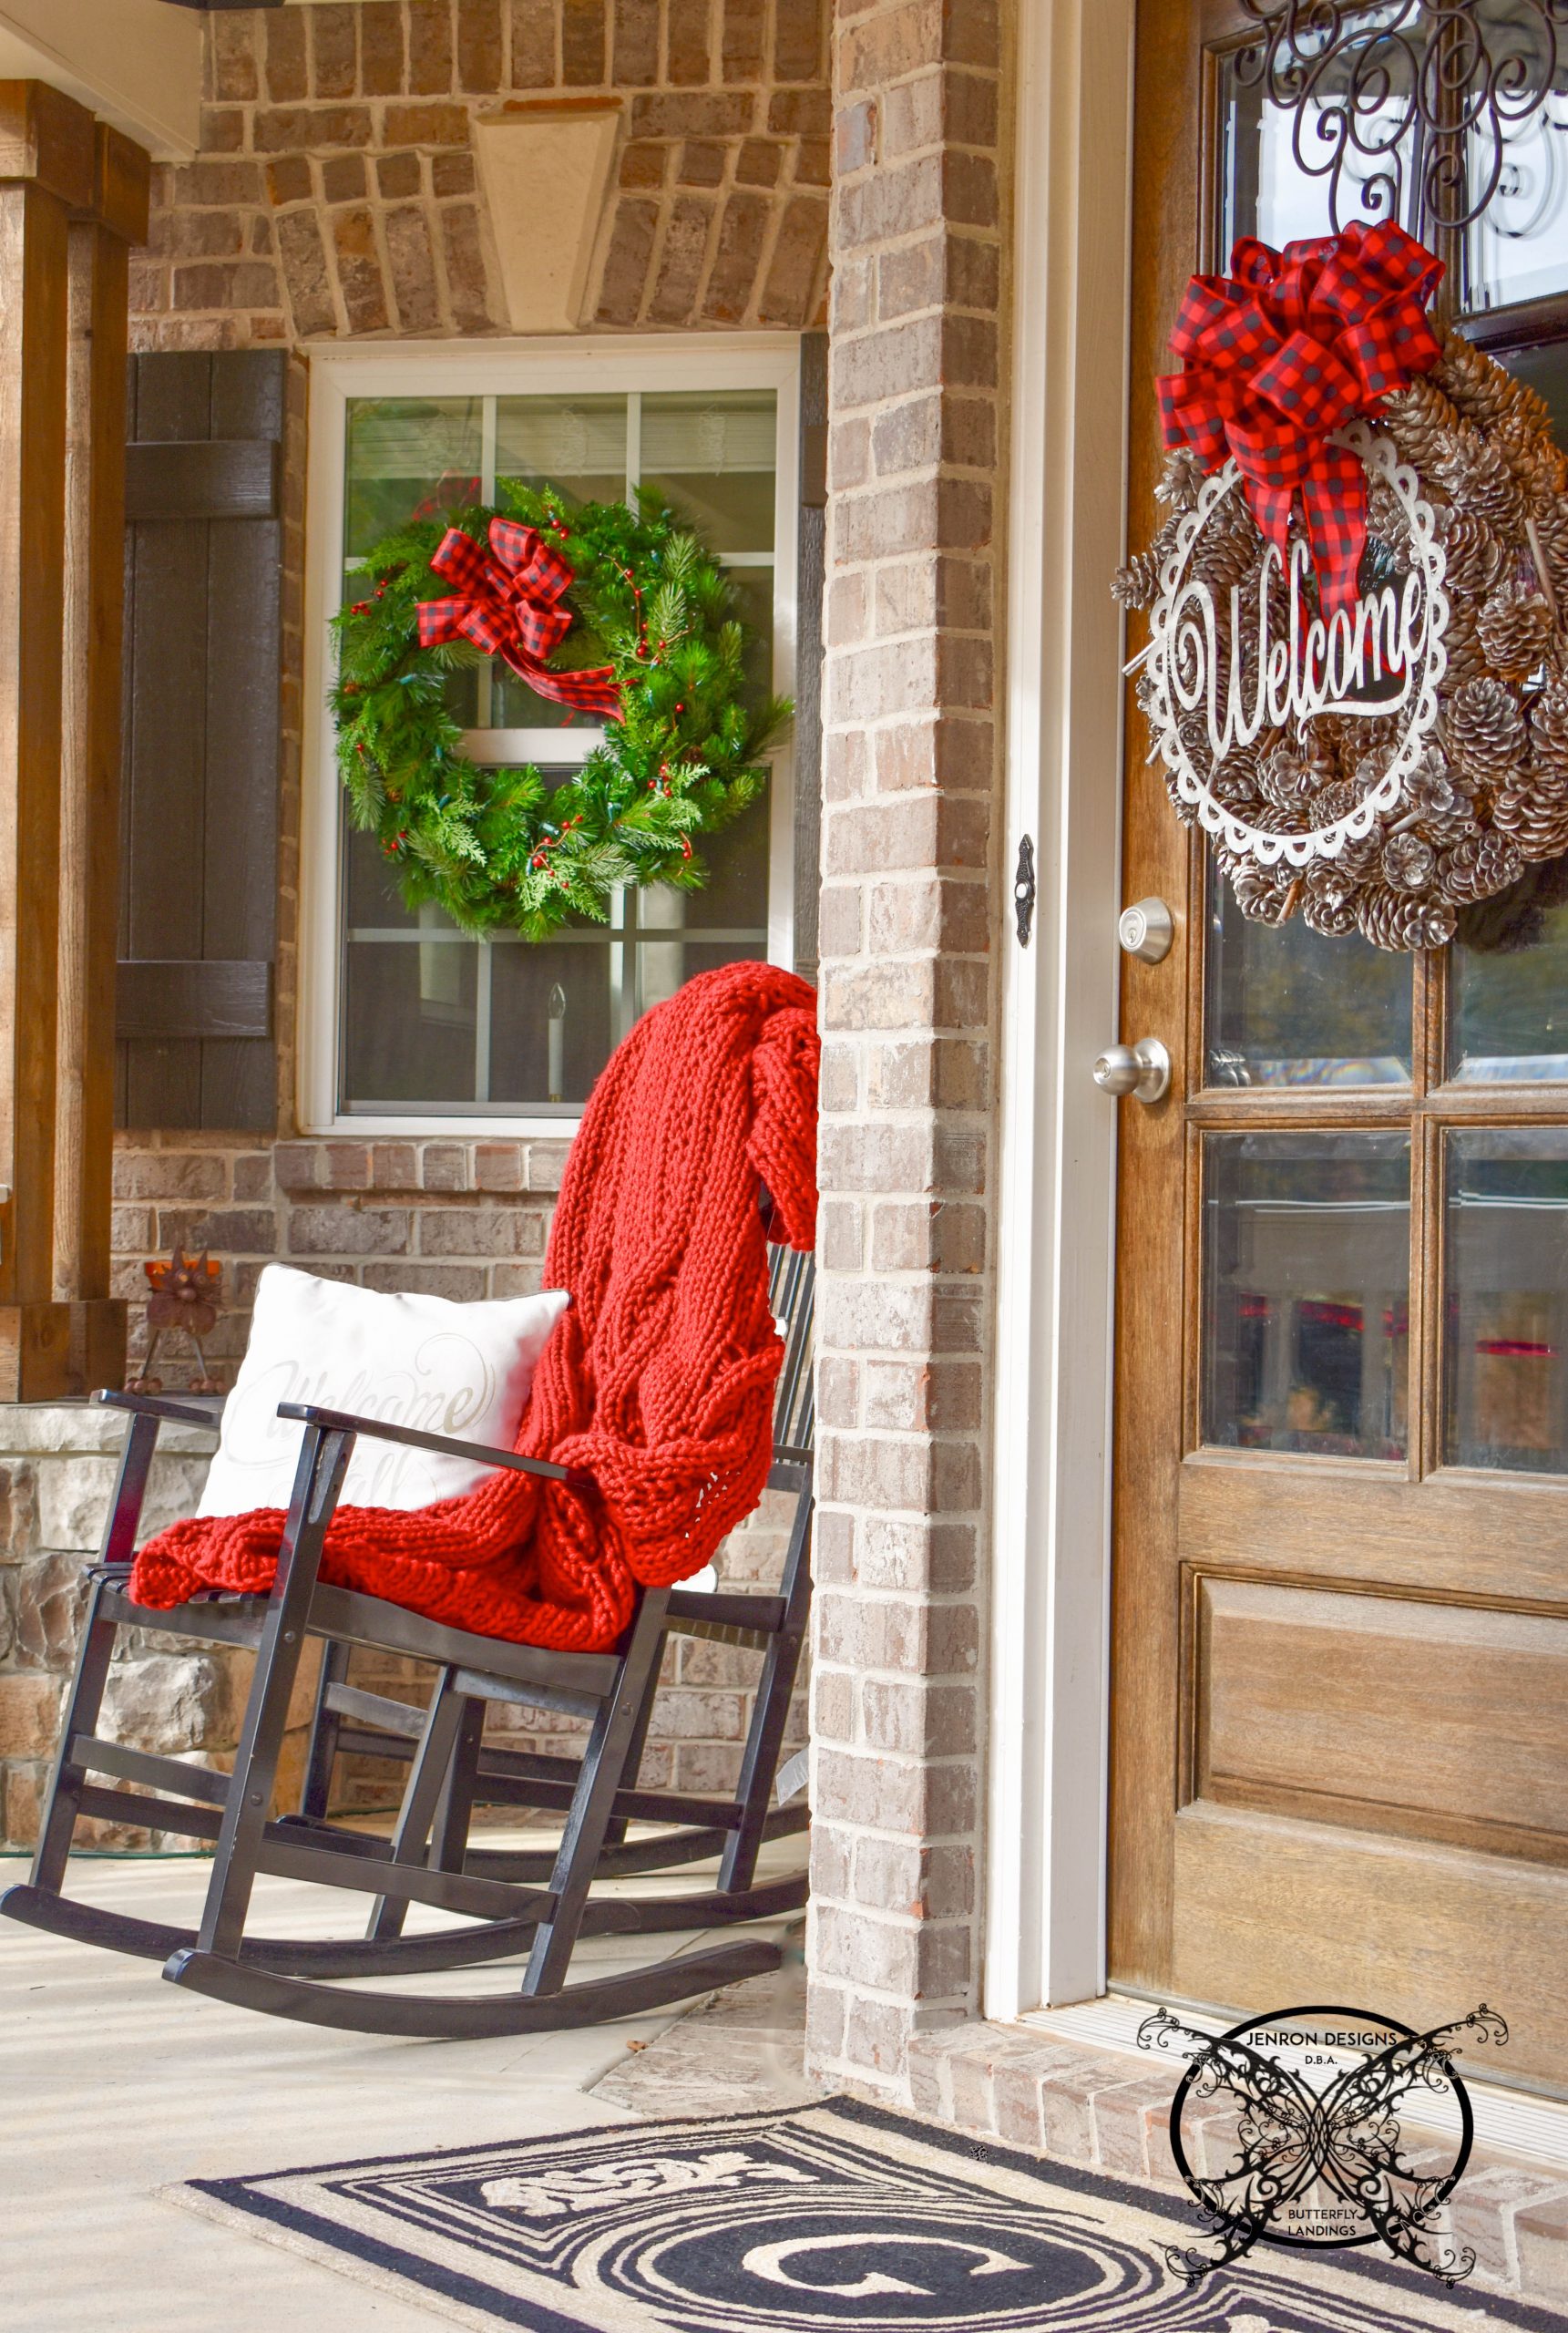 Home for The Holidays Porch JENRON DESIGNS